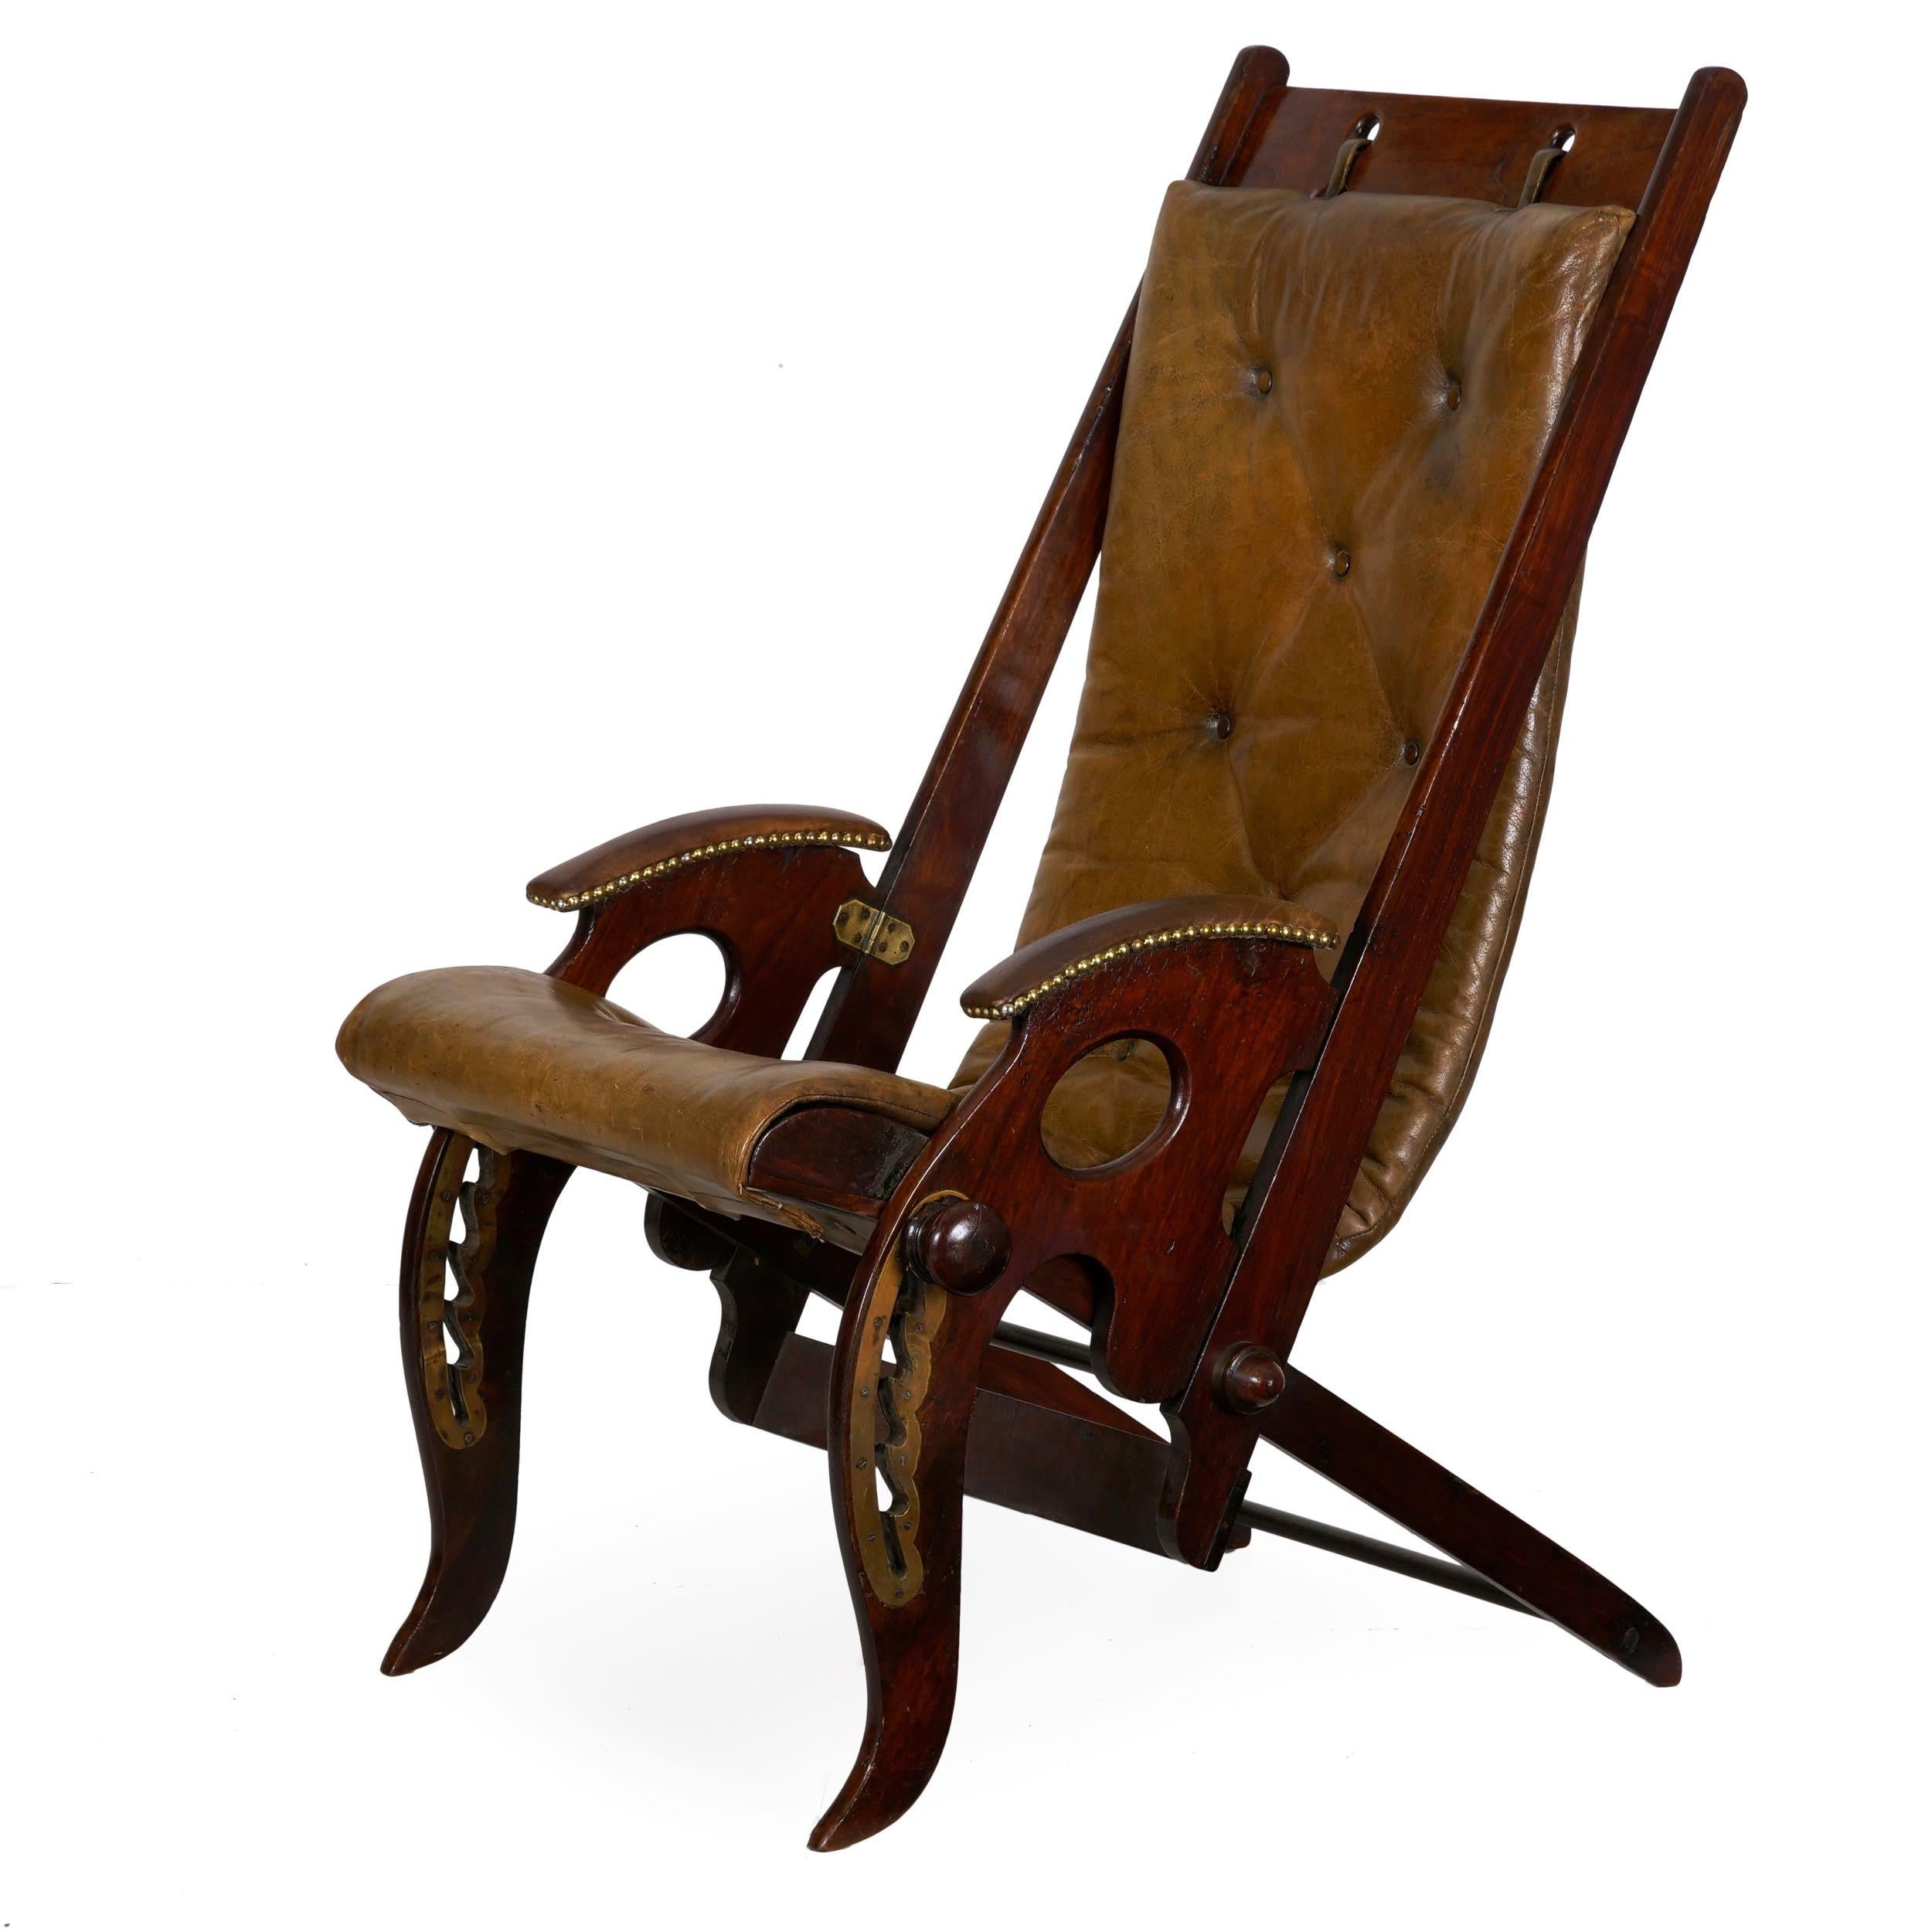 Victorian English Mahogany and Leather Reclining Metamorphic Campaign Chair, 19th Century